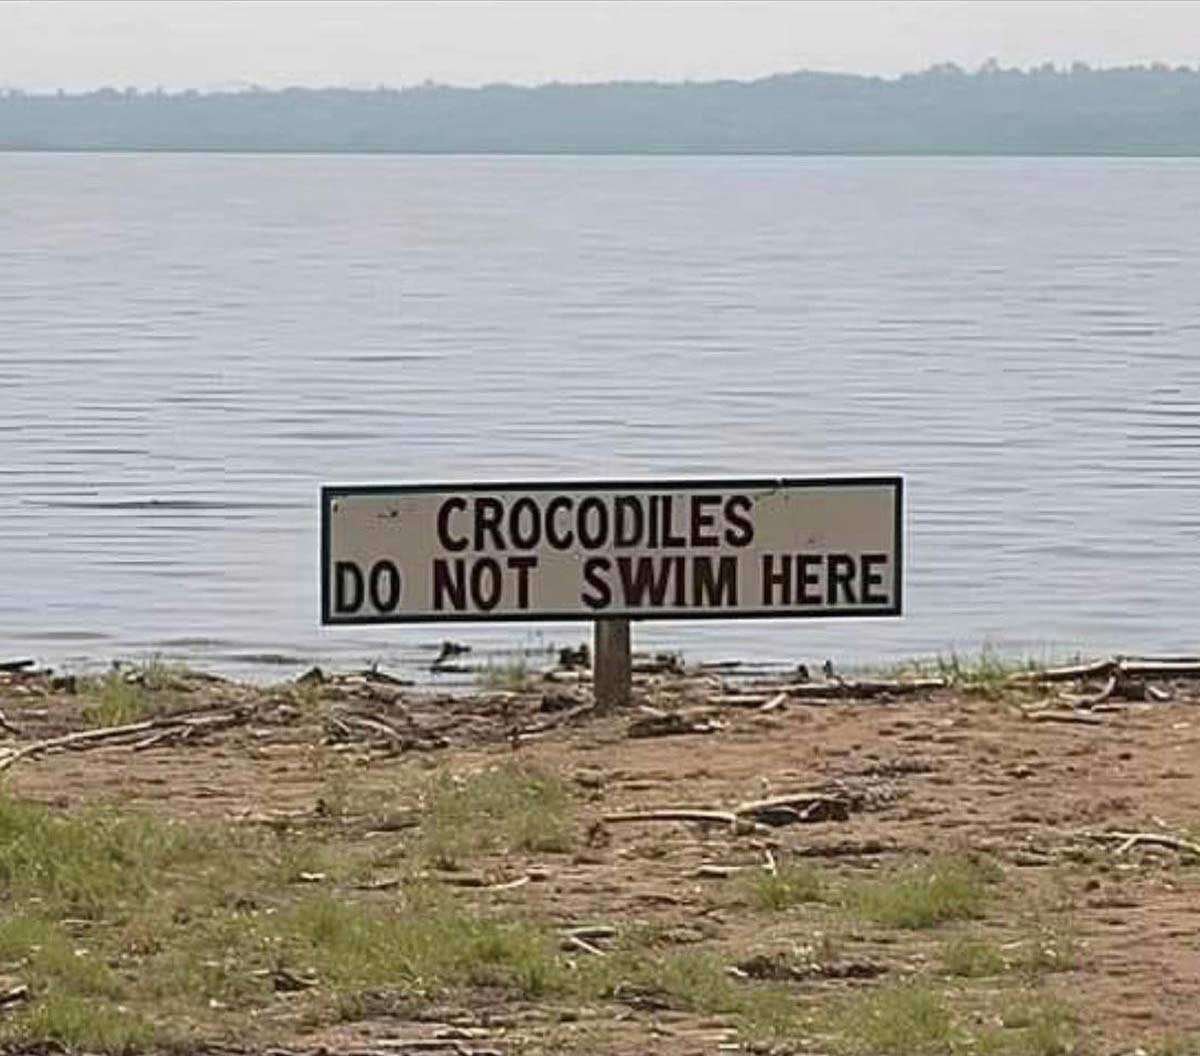 So you are saying it’s safe to swim here...